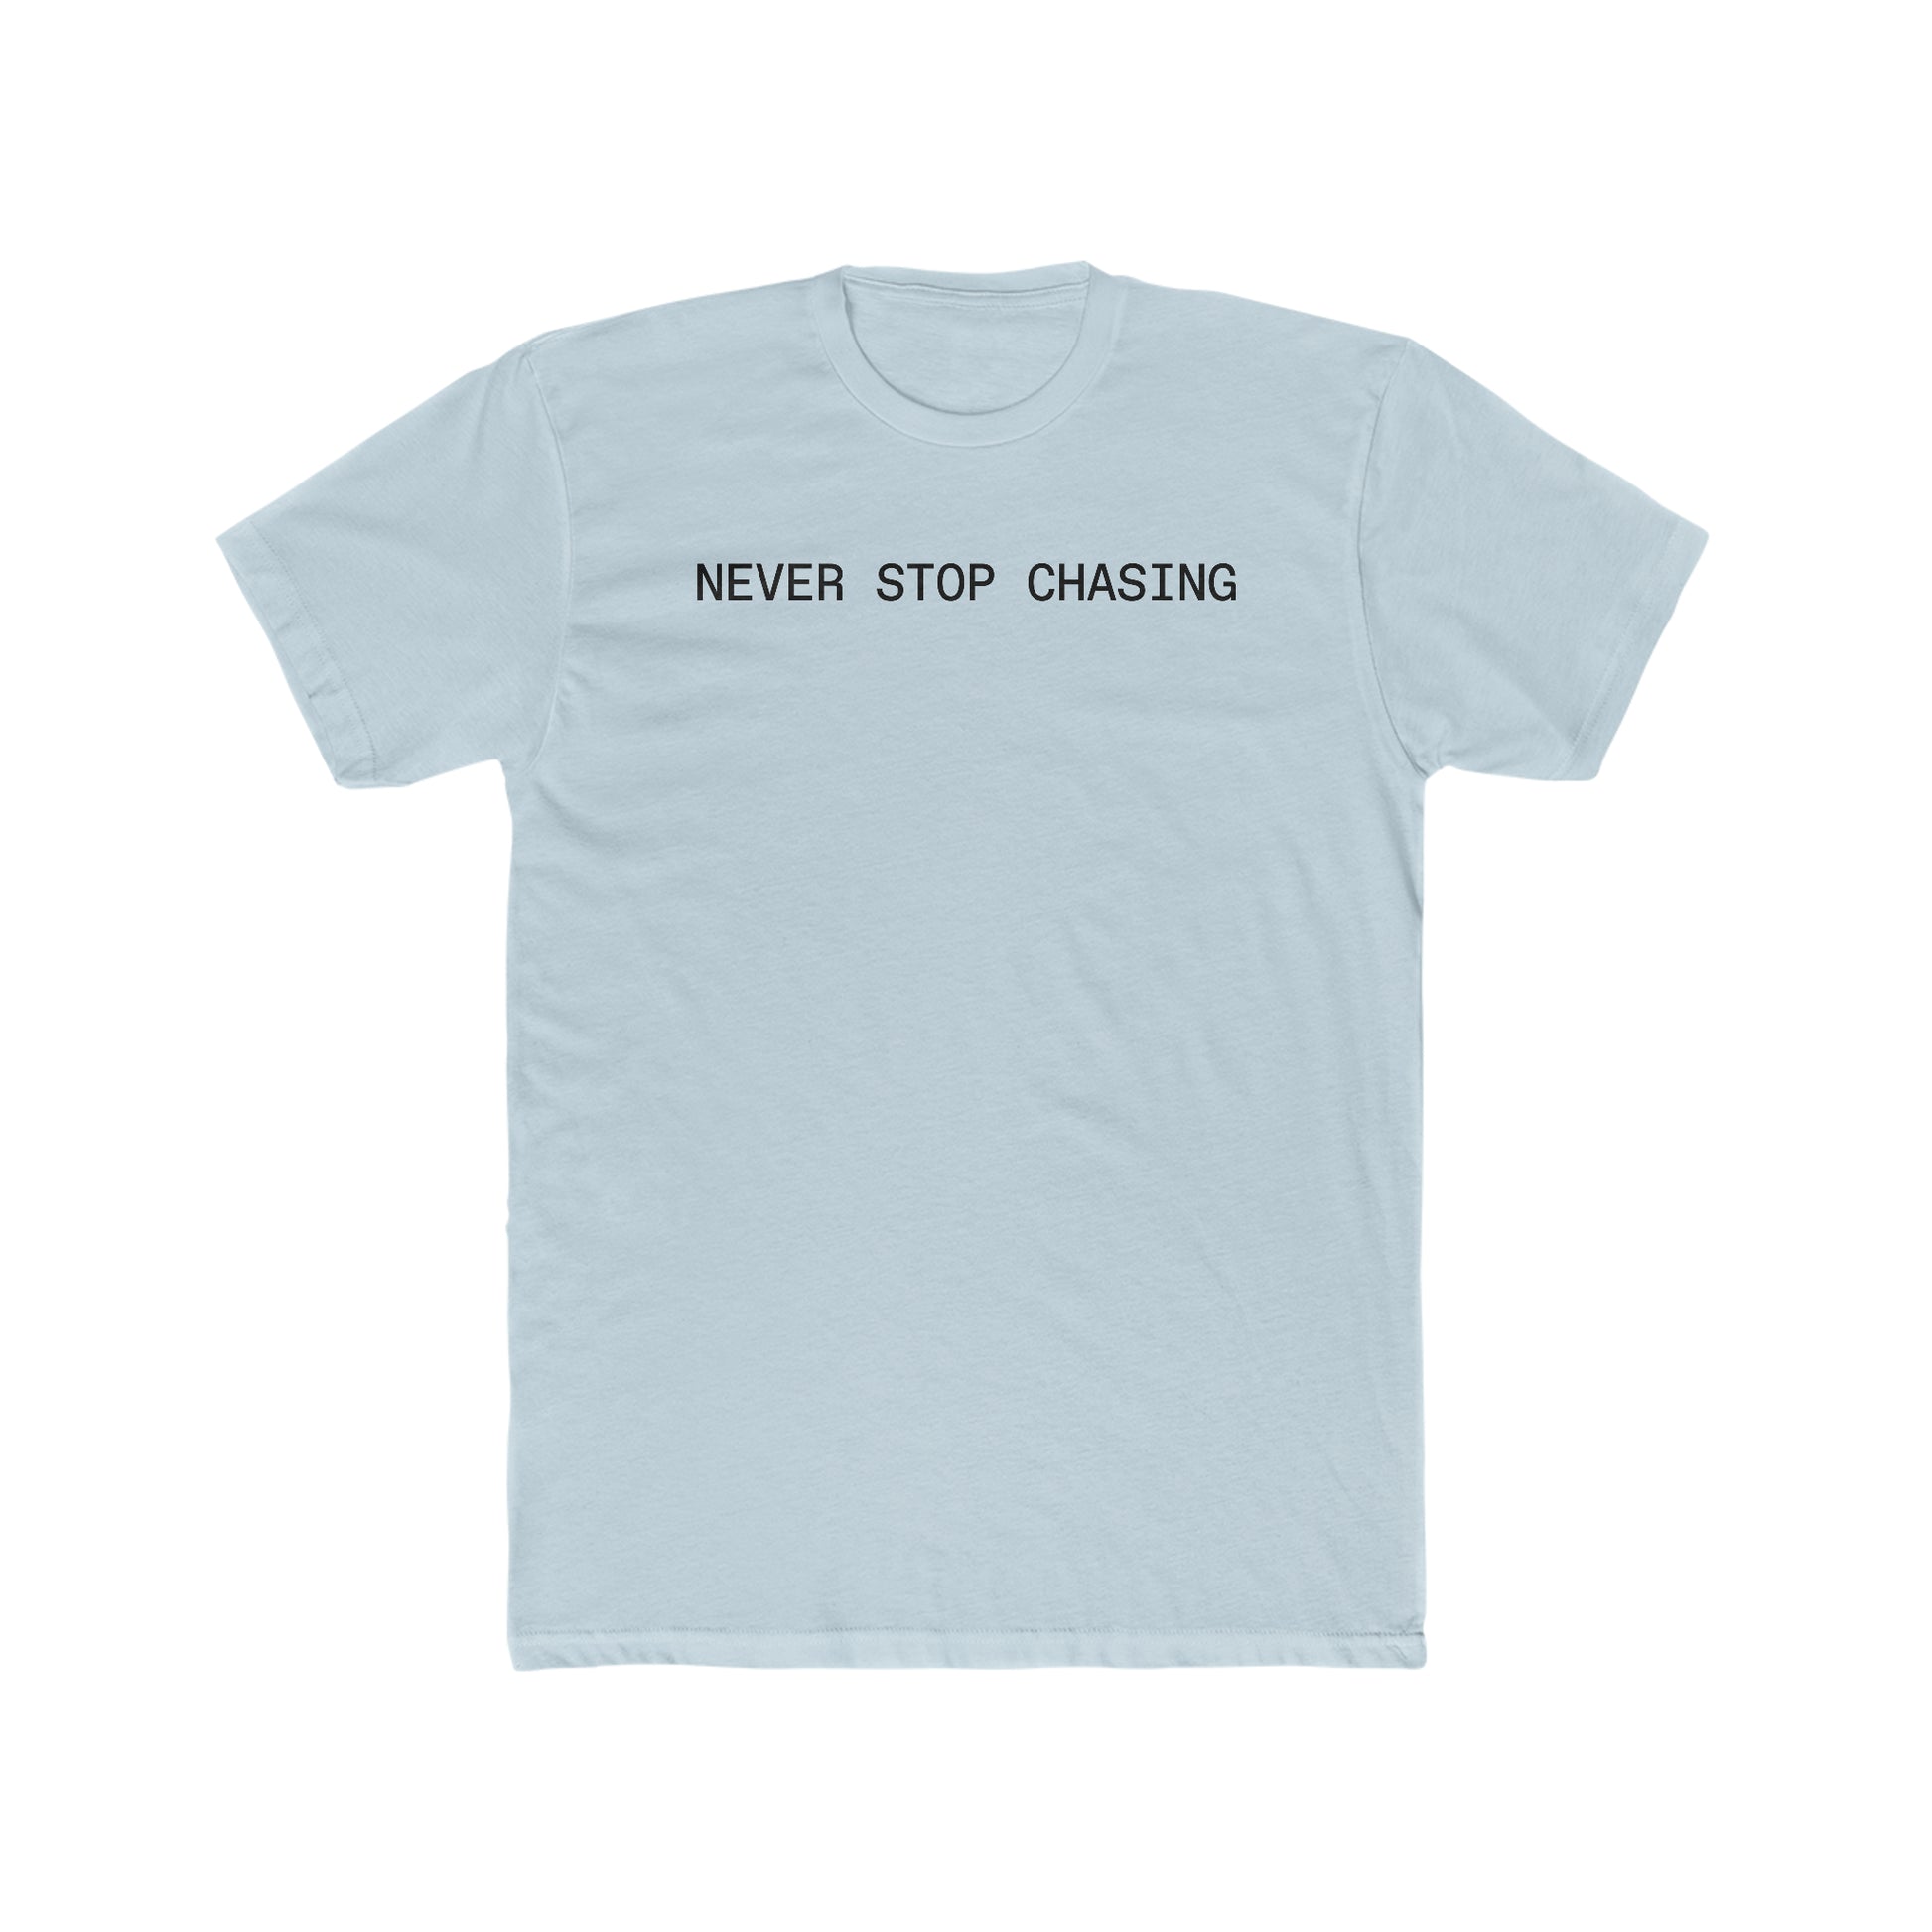 NEVER STOP CHASING NSC LIGHT BACKED TEE - Never Stop Chasing